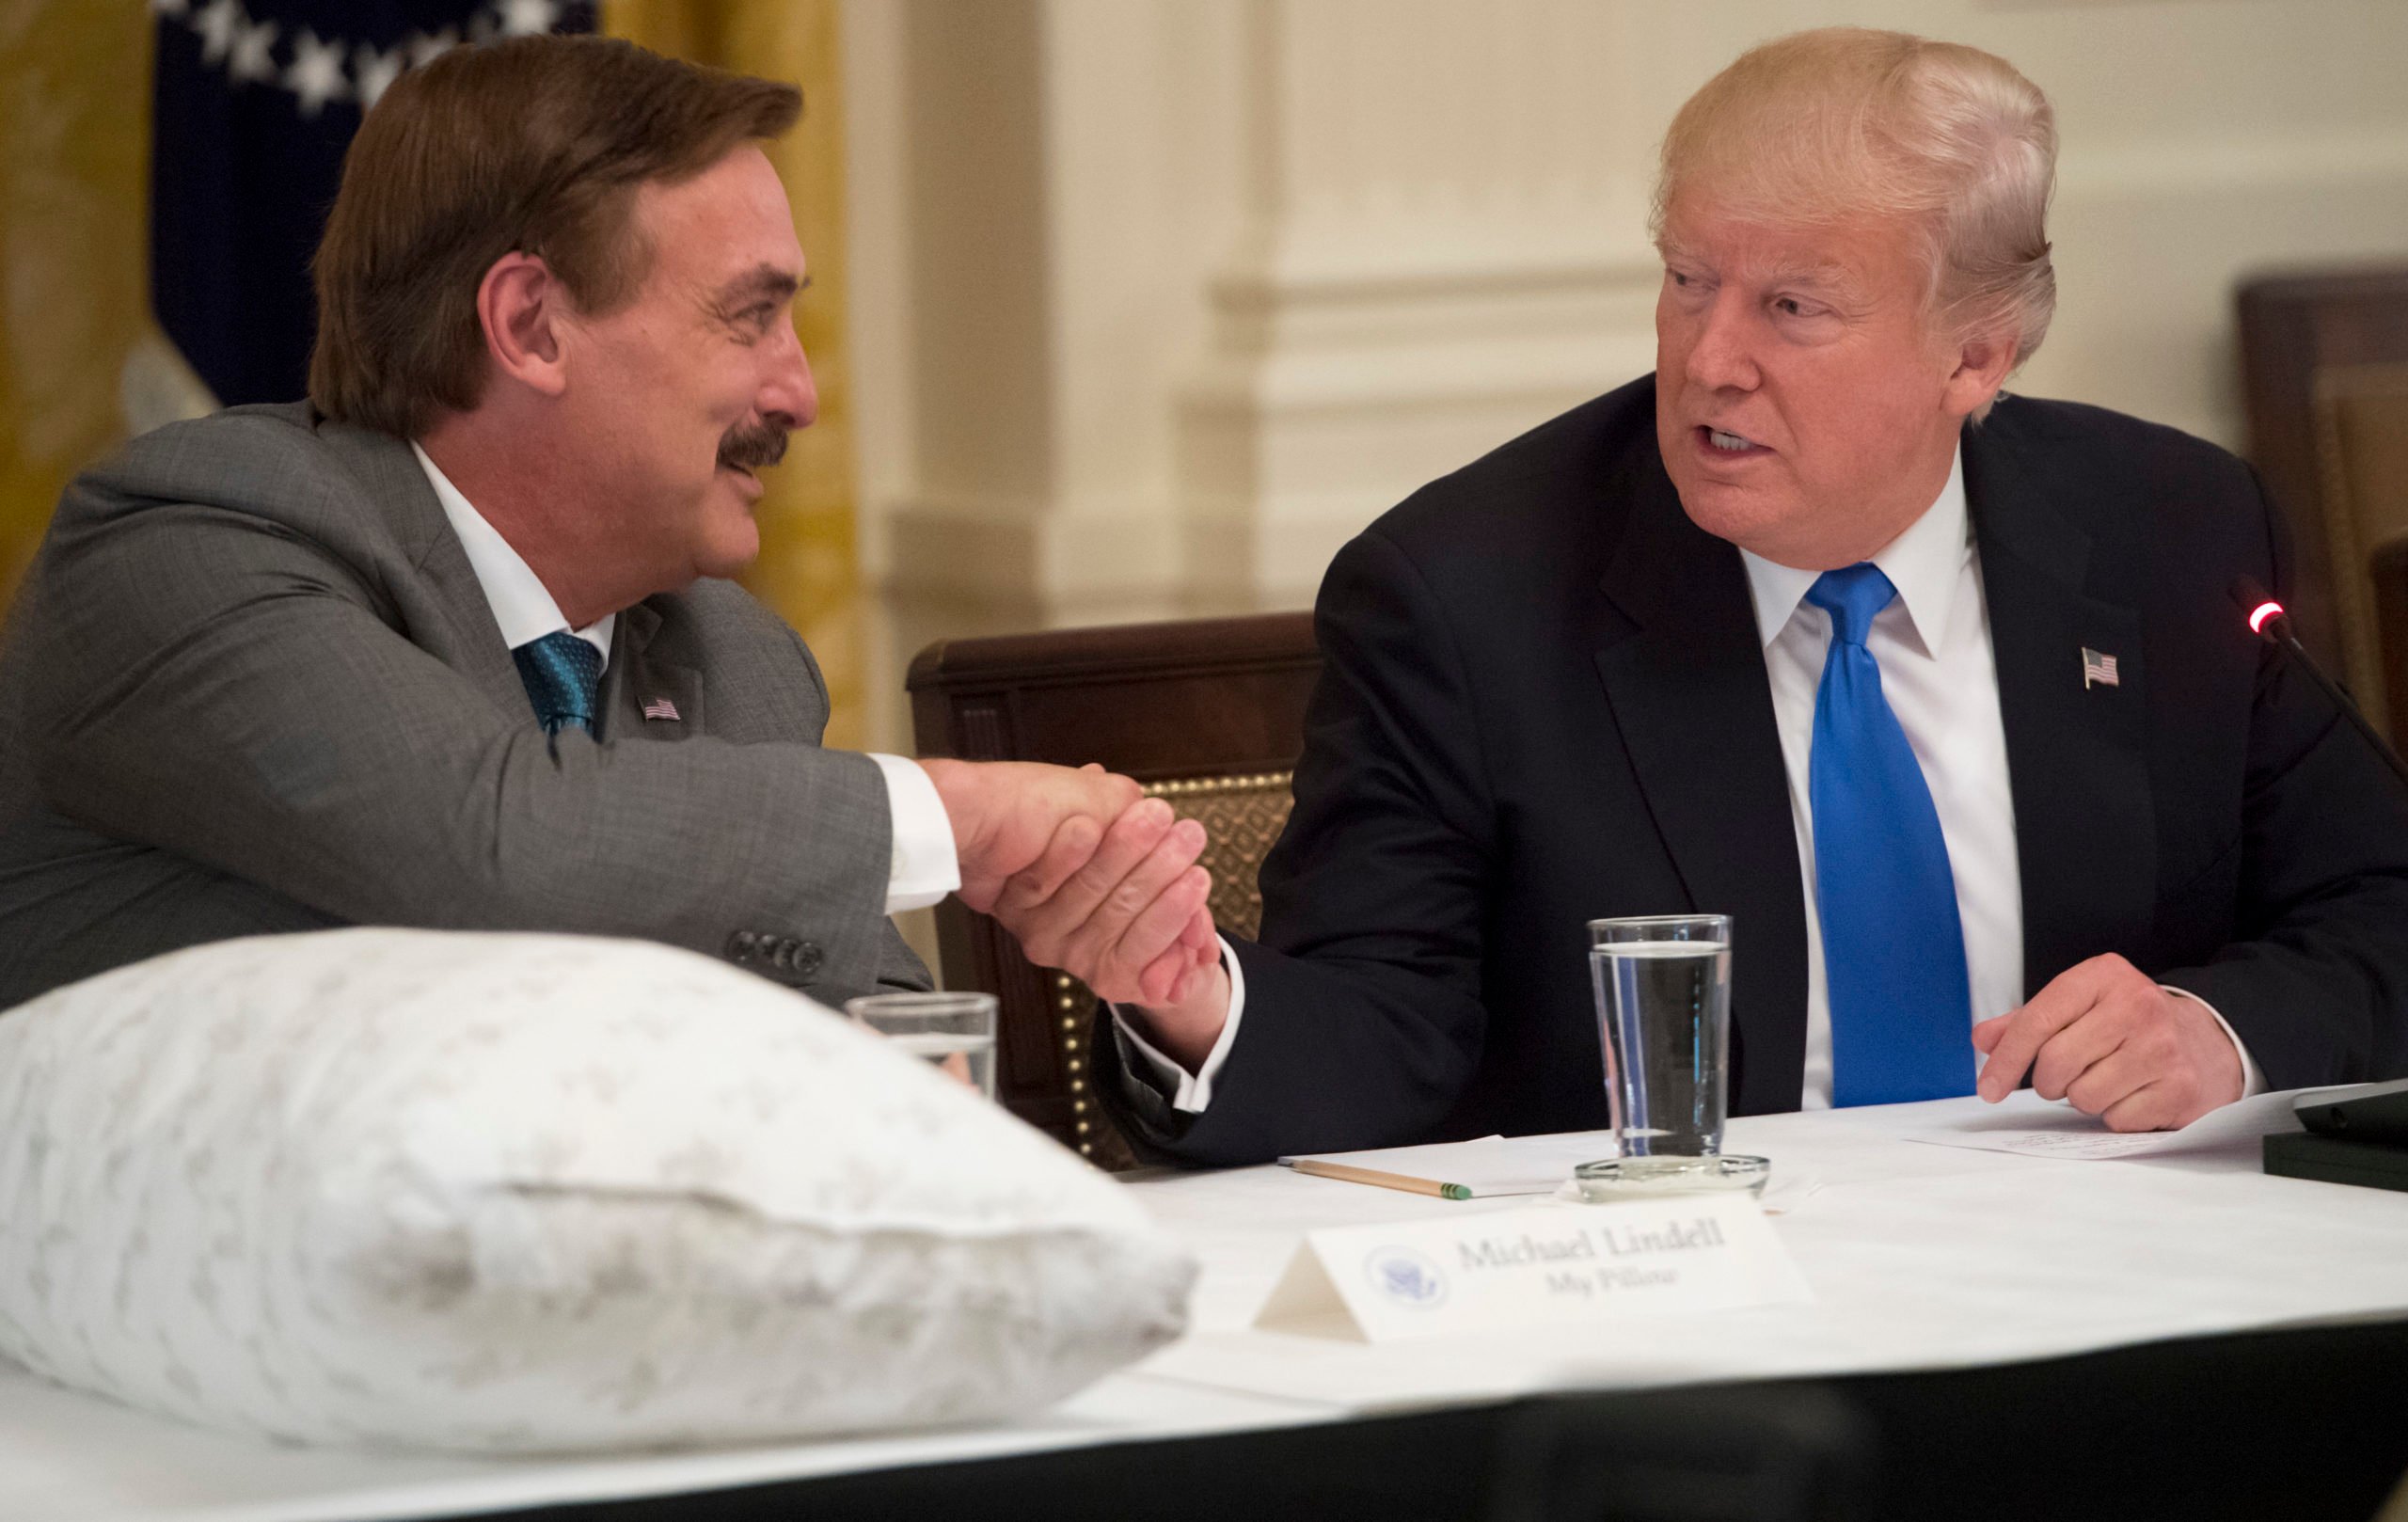 US President Donald Trump shakes hands with Mike Lindell (L), founder of My Pillow, during a Made in America event with US manufacturers in the East Room of the White House in Washington, DC, July 19, 2017. (SAUL LOEB/AFP via Getty Images)